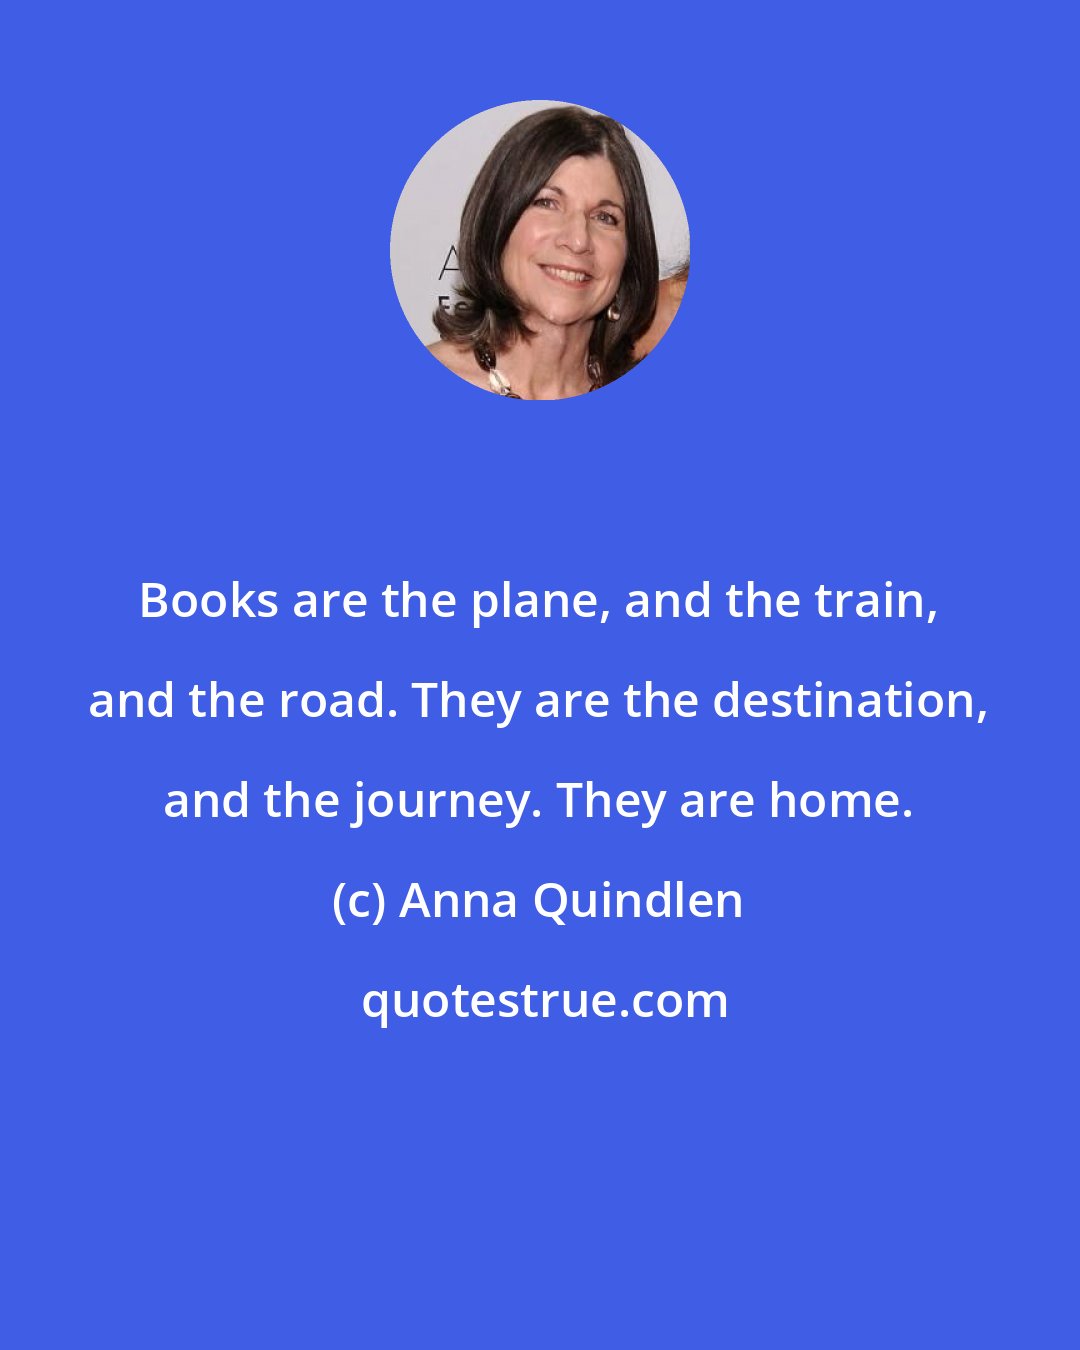 Anna Quindlen: Books are the plane, and the train, and the road. They are the destination, and the journey. They are home.